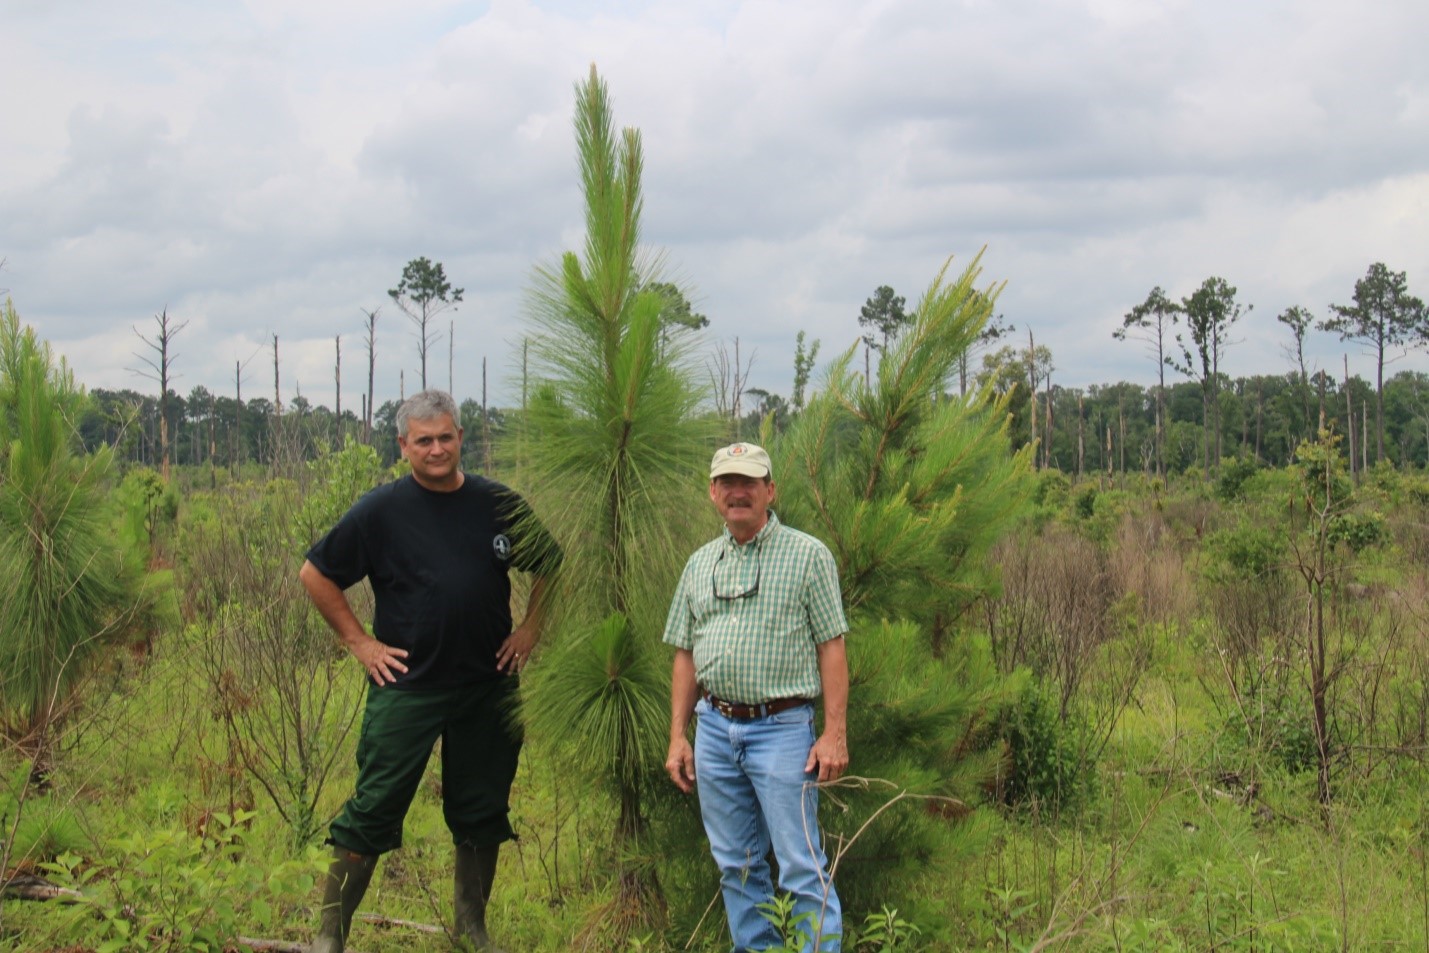 Replanted Longleaf in National Forest, Kerry Hogg, USFS, and Kent Evans, USFS retired